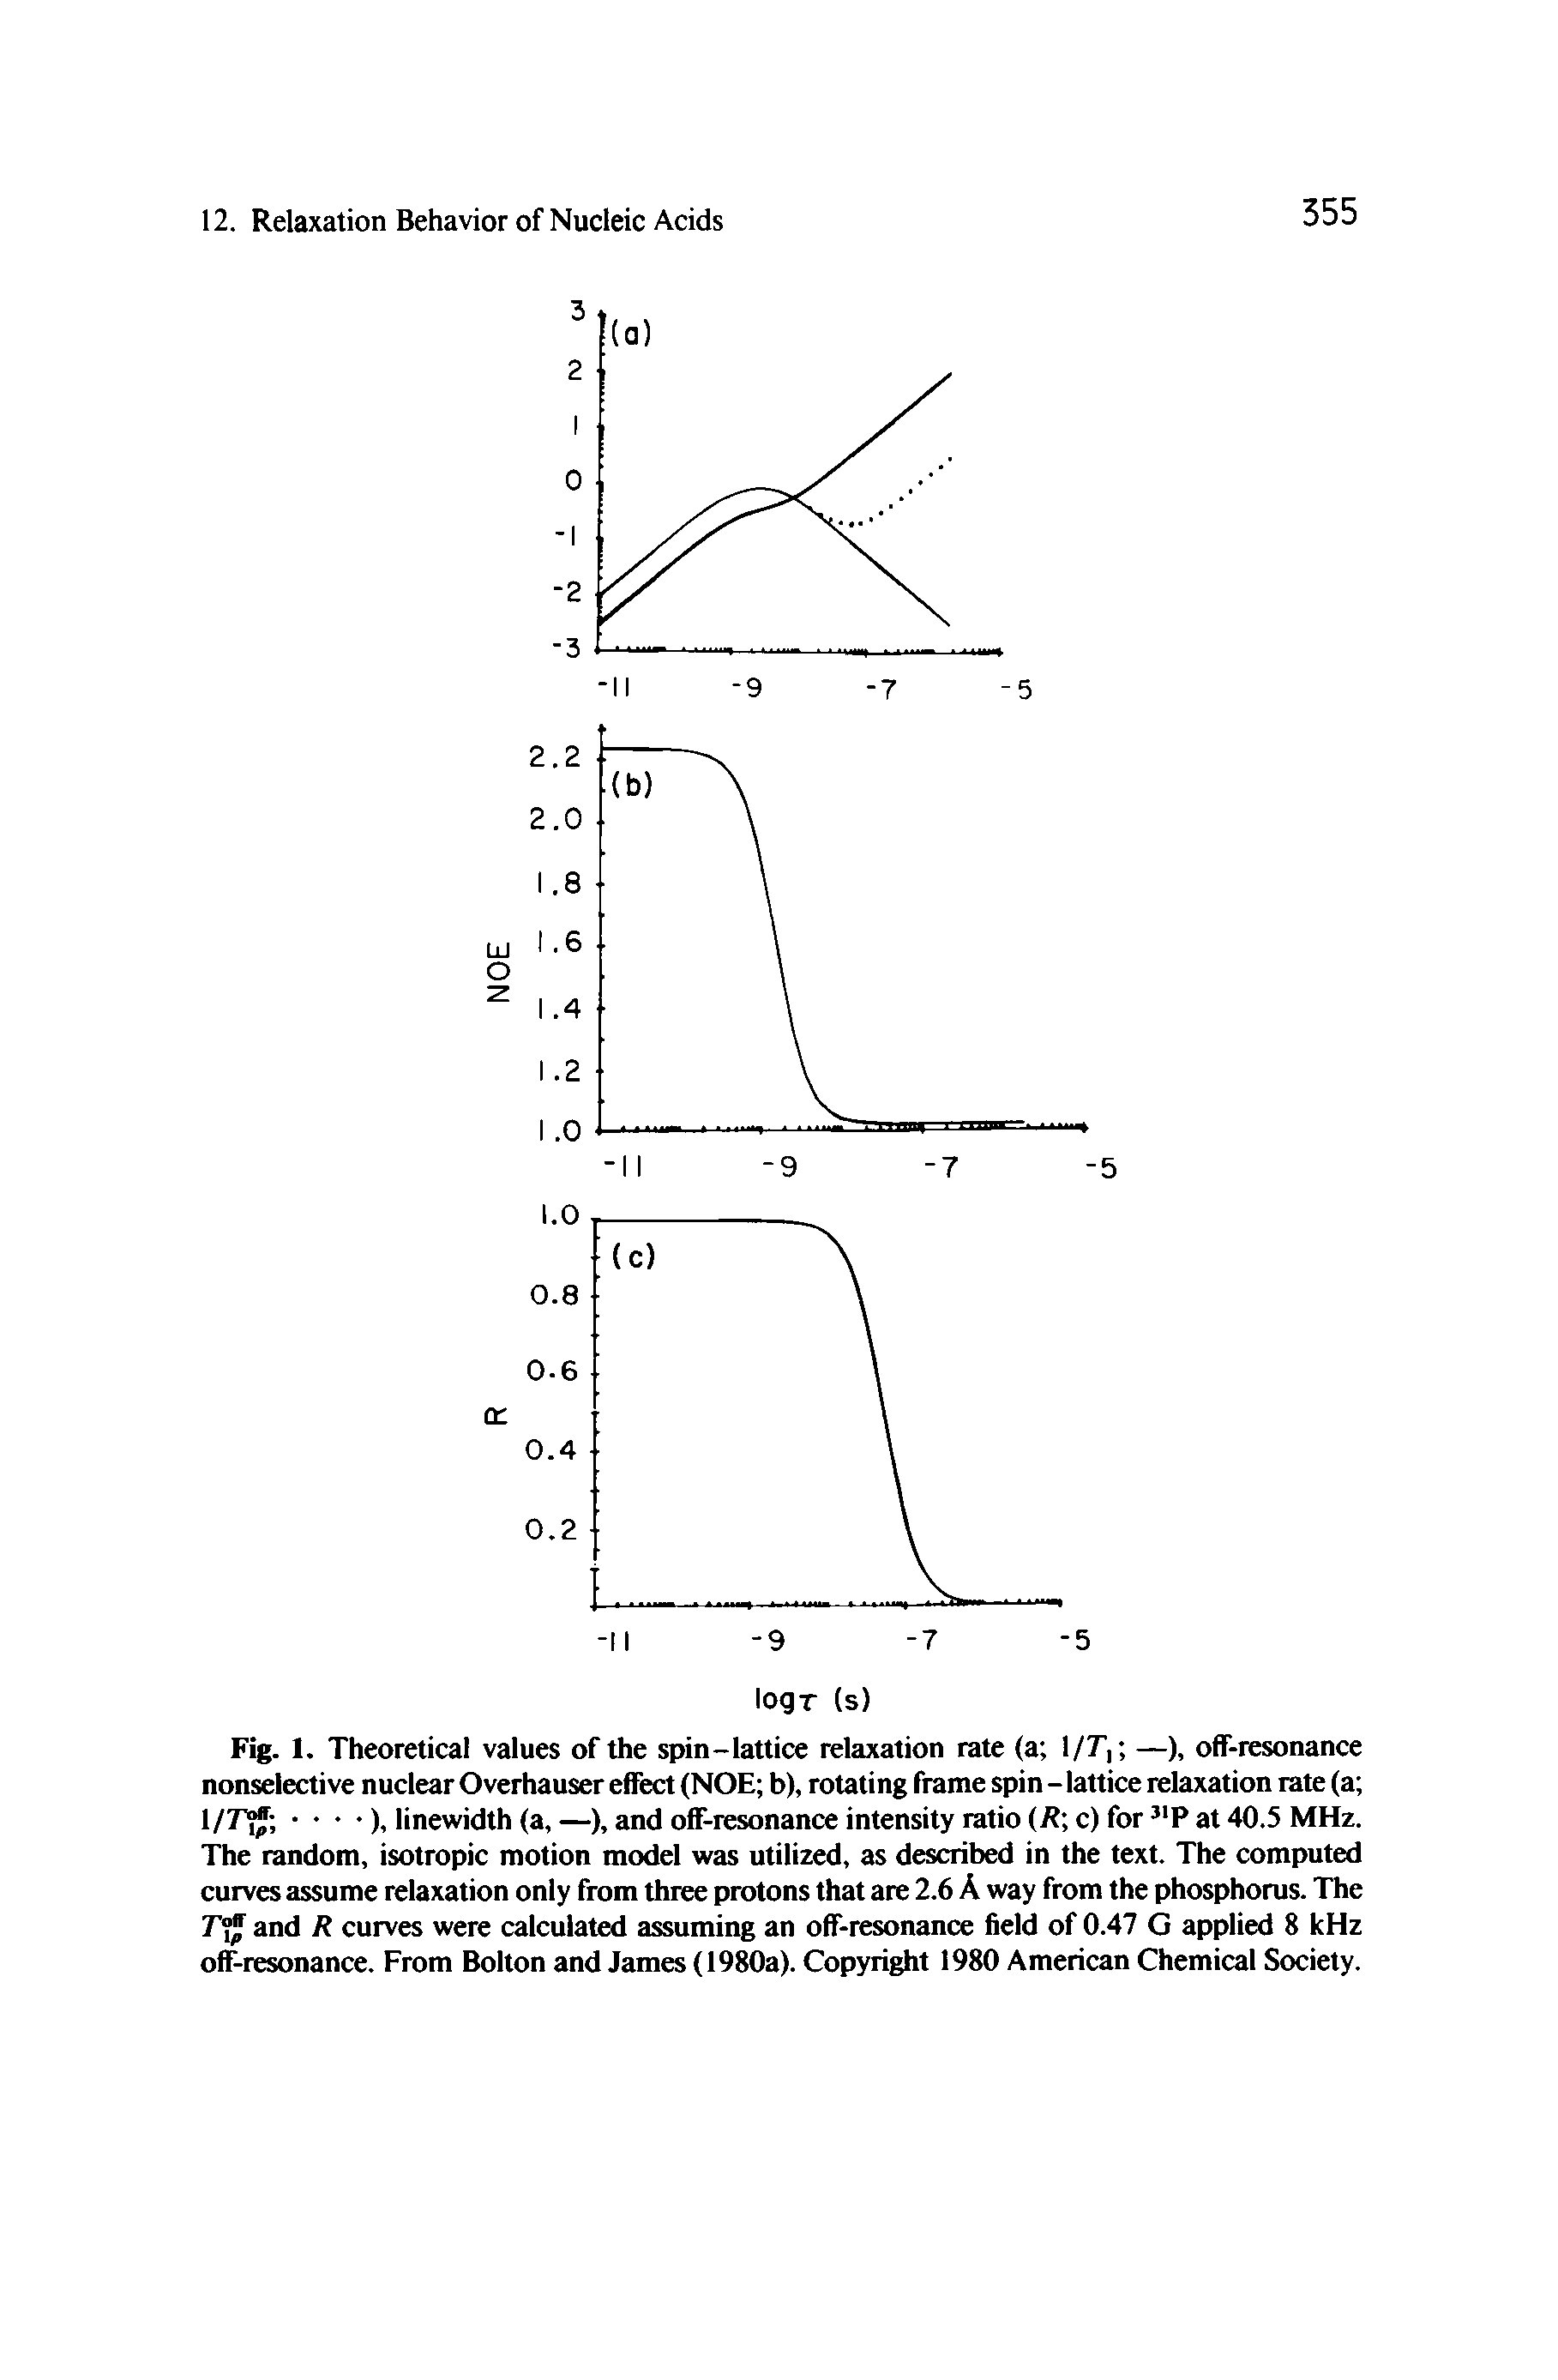 Fig. 1. Theoretical values of the spin-lattice relaxation rate (a l/T, —), off-resonance nonselective nuclear Overhauser effect (NOE b), rotating (fame spin - lattice relaxation rate (a l/ n )t linewidth (a,—), and off-resonance intensity ratio (R c) for P at 40.5 MHz. The random, isotropic motion model vtras utilized, as described in the text. The computed curves assume relaxation only from three protons that are 2.6 A way from the phosphorus. The and R curves were calculated assuming an off-resonance field of 0.47 G applied 8 kHz off-resonance. From Bolton and James (1980a). Copyright 1980 American Chemical Society.